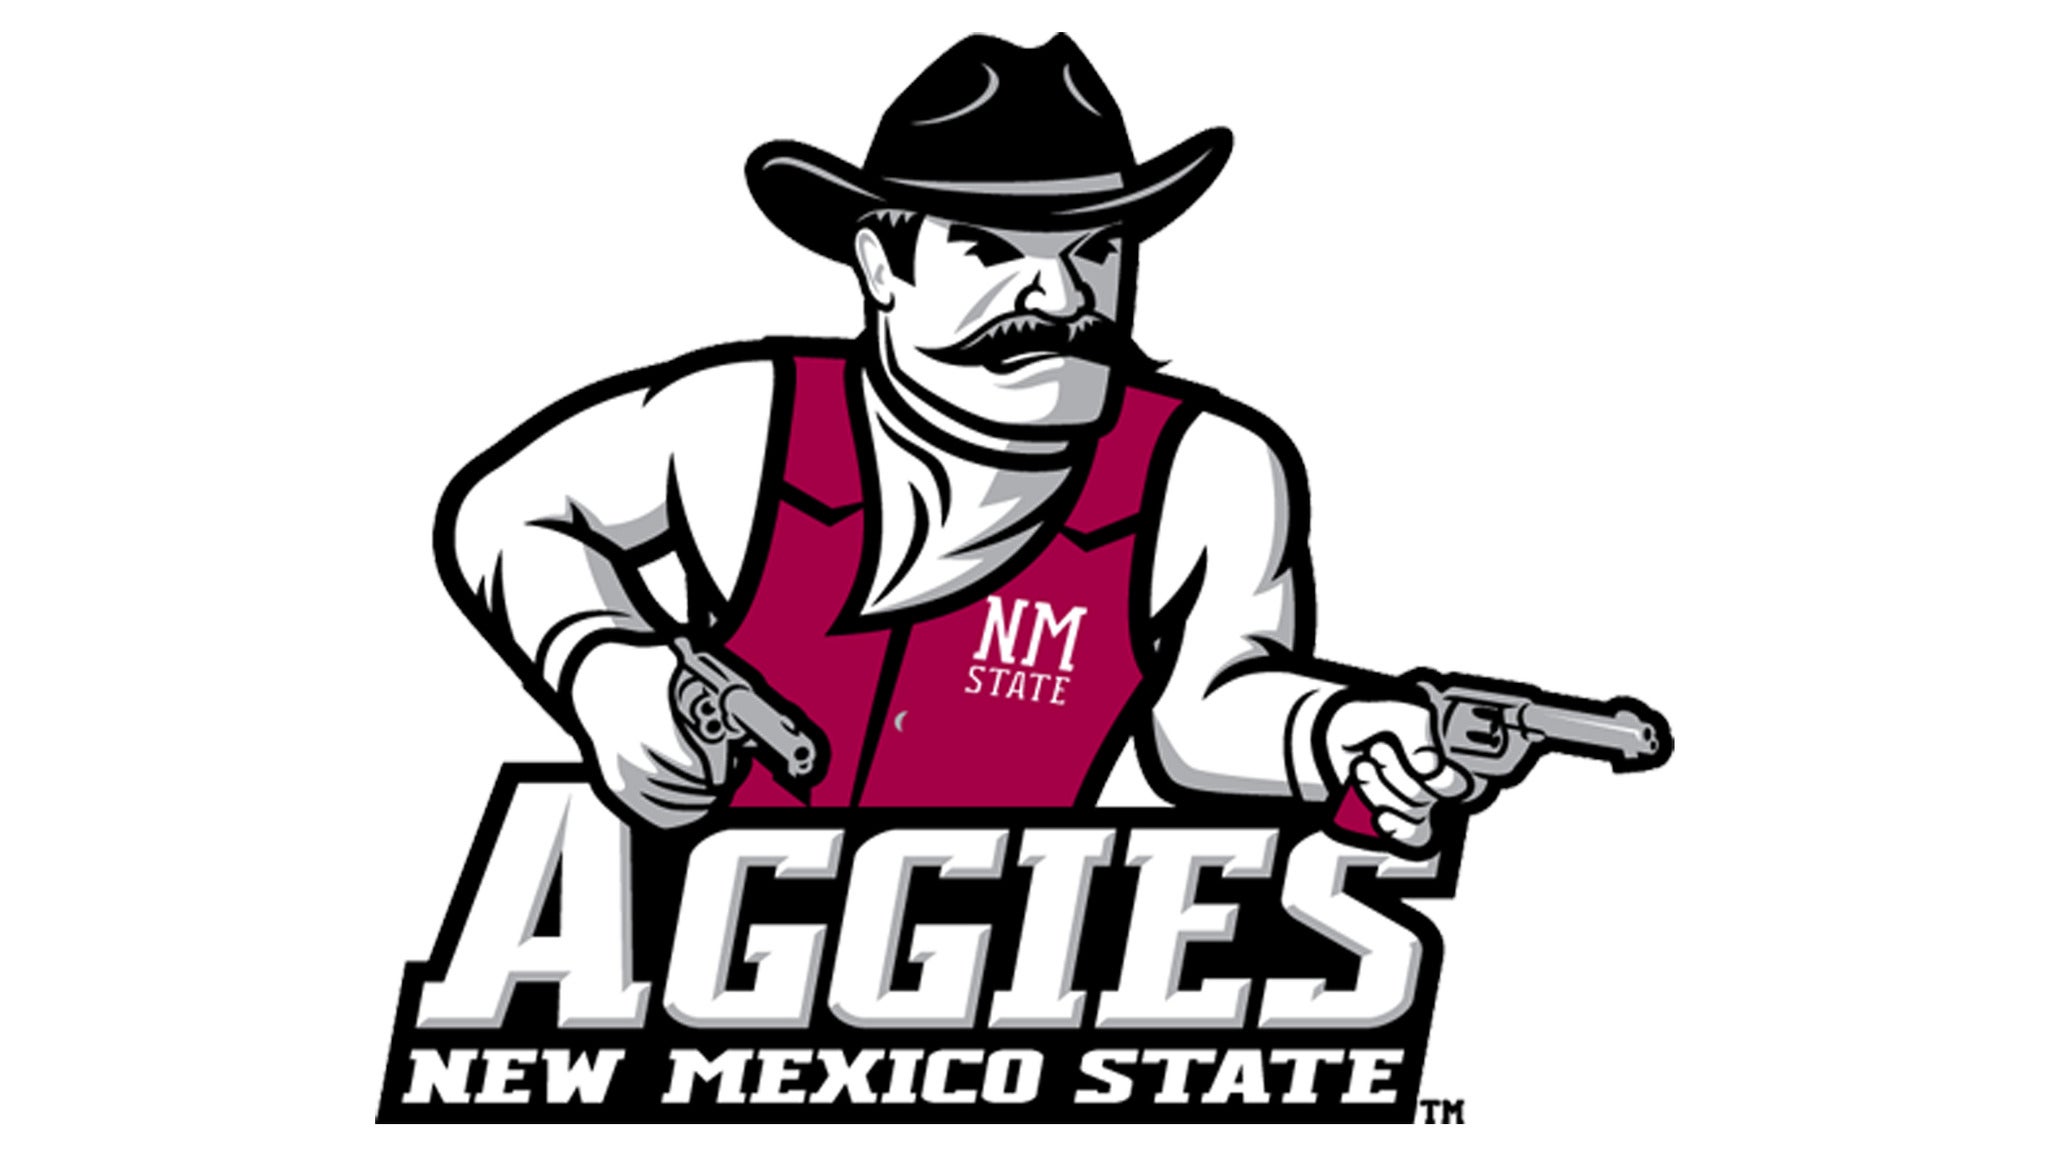 New Mexico State Univ (NMSU) Aggies Football Tickets | 2020 College Tickets & Schedule